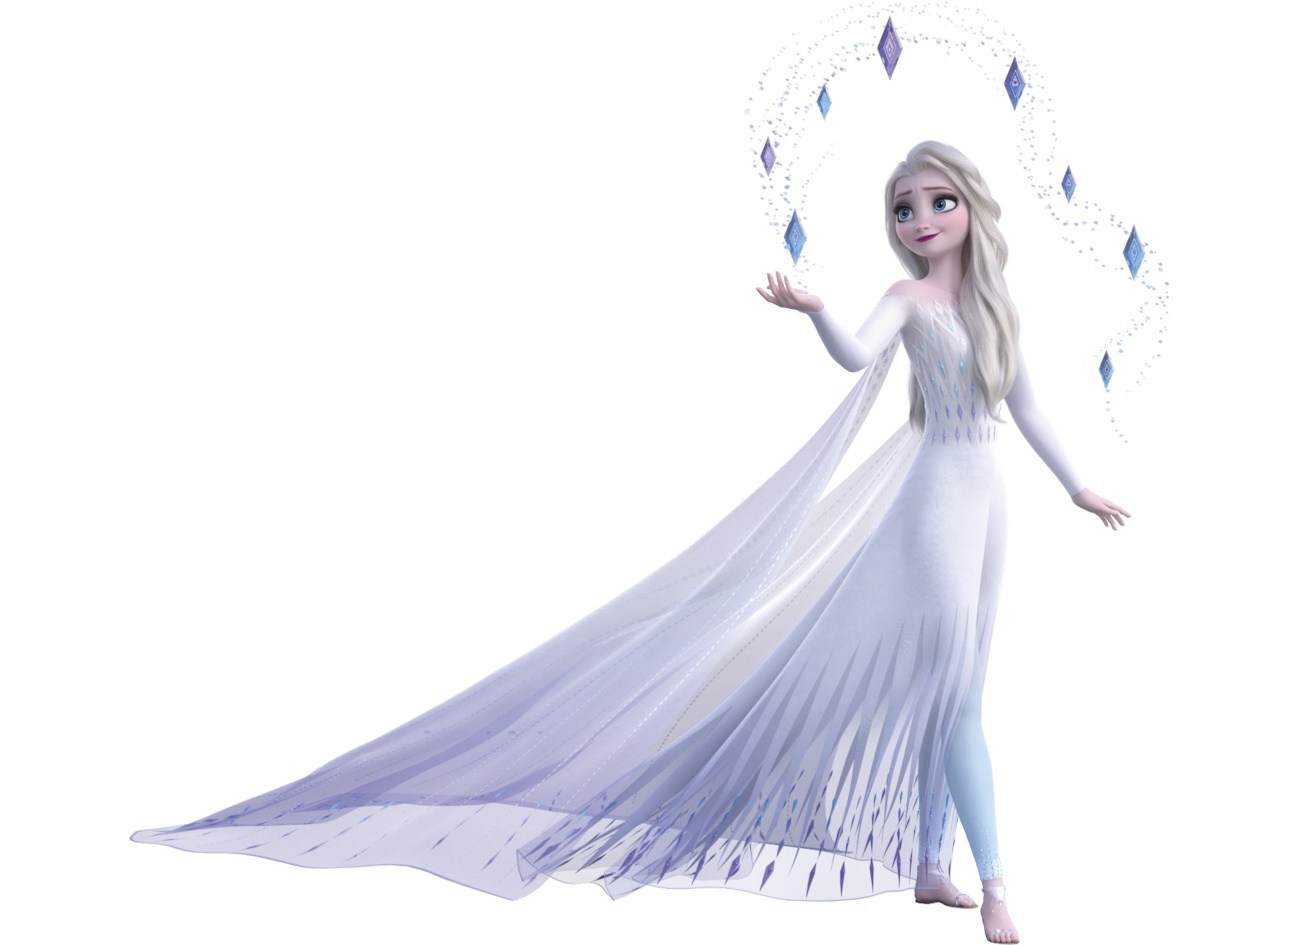 Make Your Own: Elsa's White Forest Dress from Frozen II | Carbon Costume |  DIY Guides to Dress Up for Cosplay & Halloween